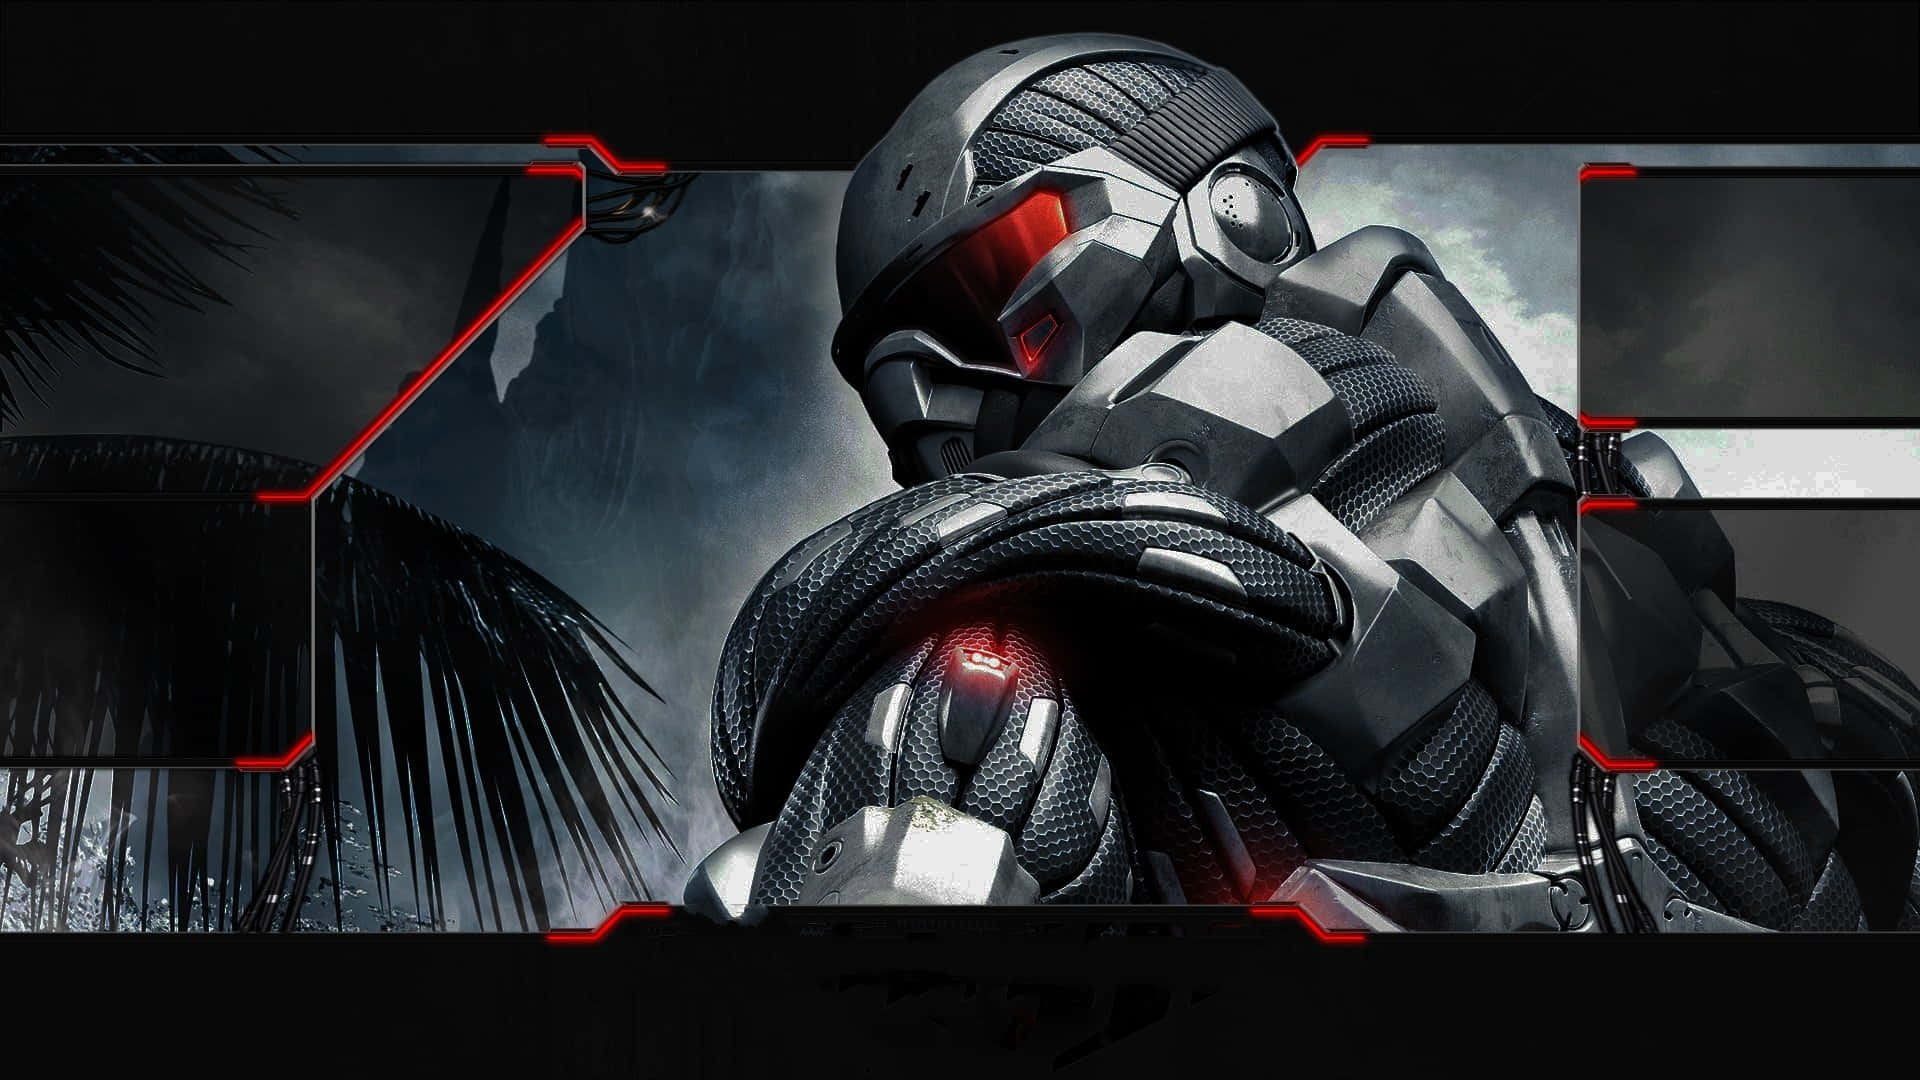 A Black And Red Image Of A Robot With Red Eyes Wallpaper